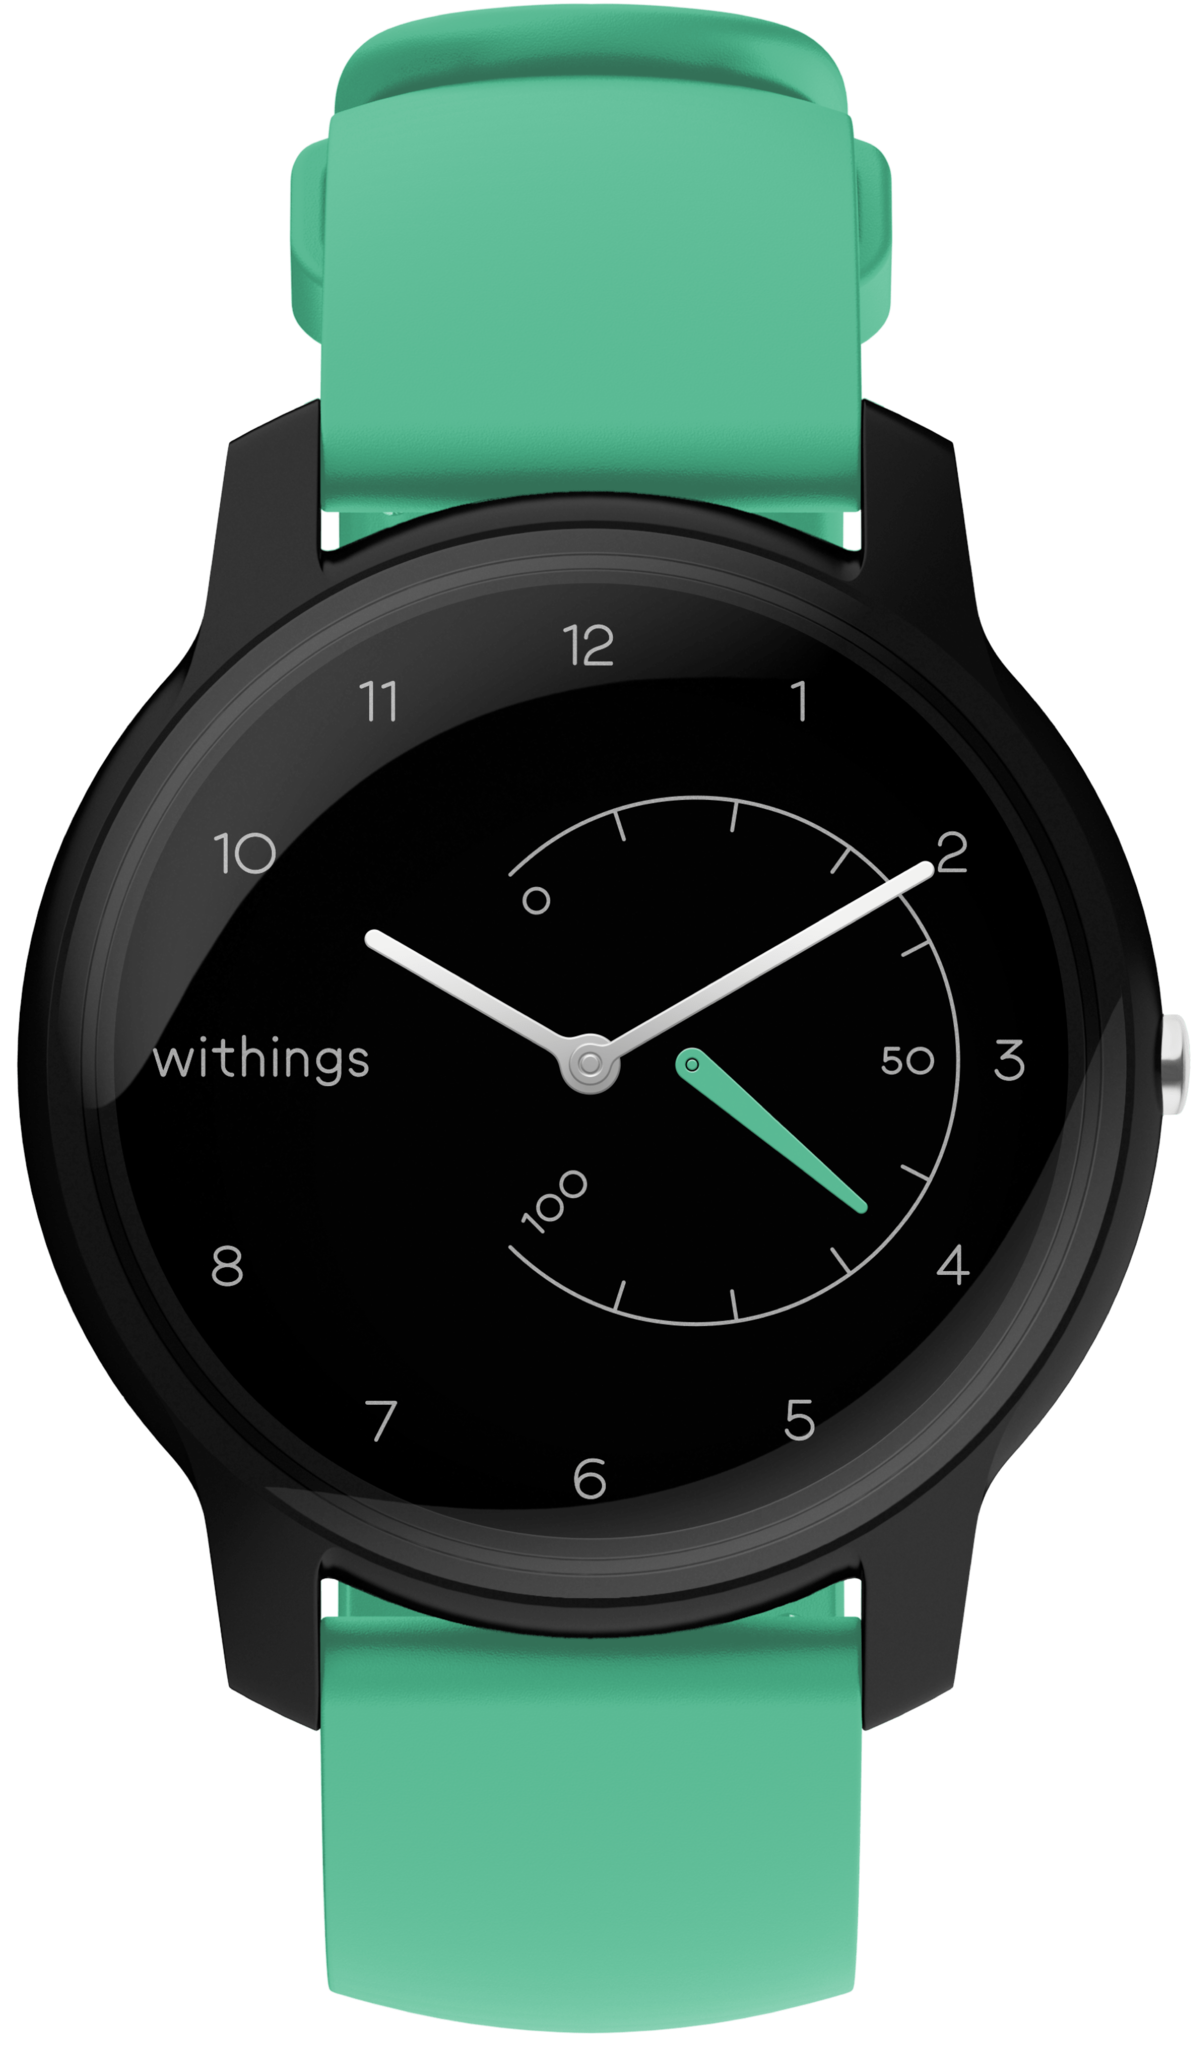 https://www.androidcentral.com/sites/androidcentral.com/files/article_images/2019/11/withings-move-basic-black-mint.png?itok=20DThpJL